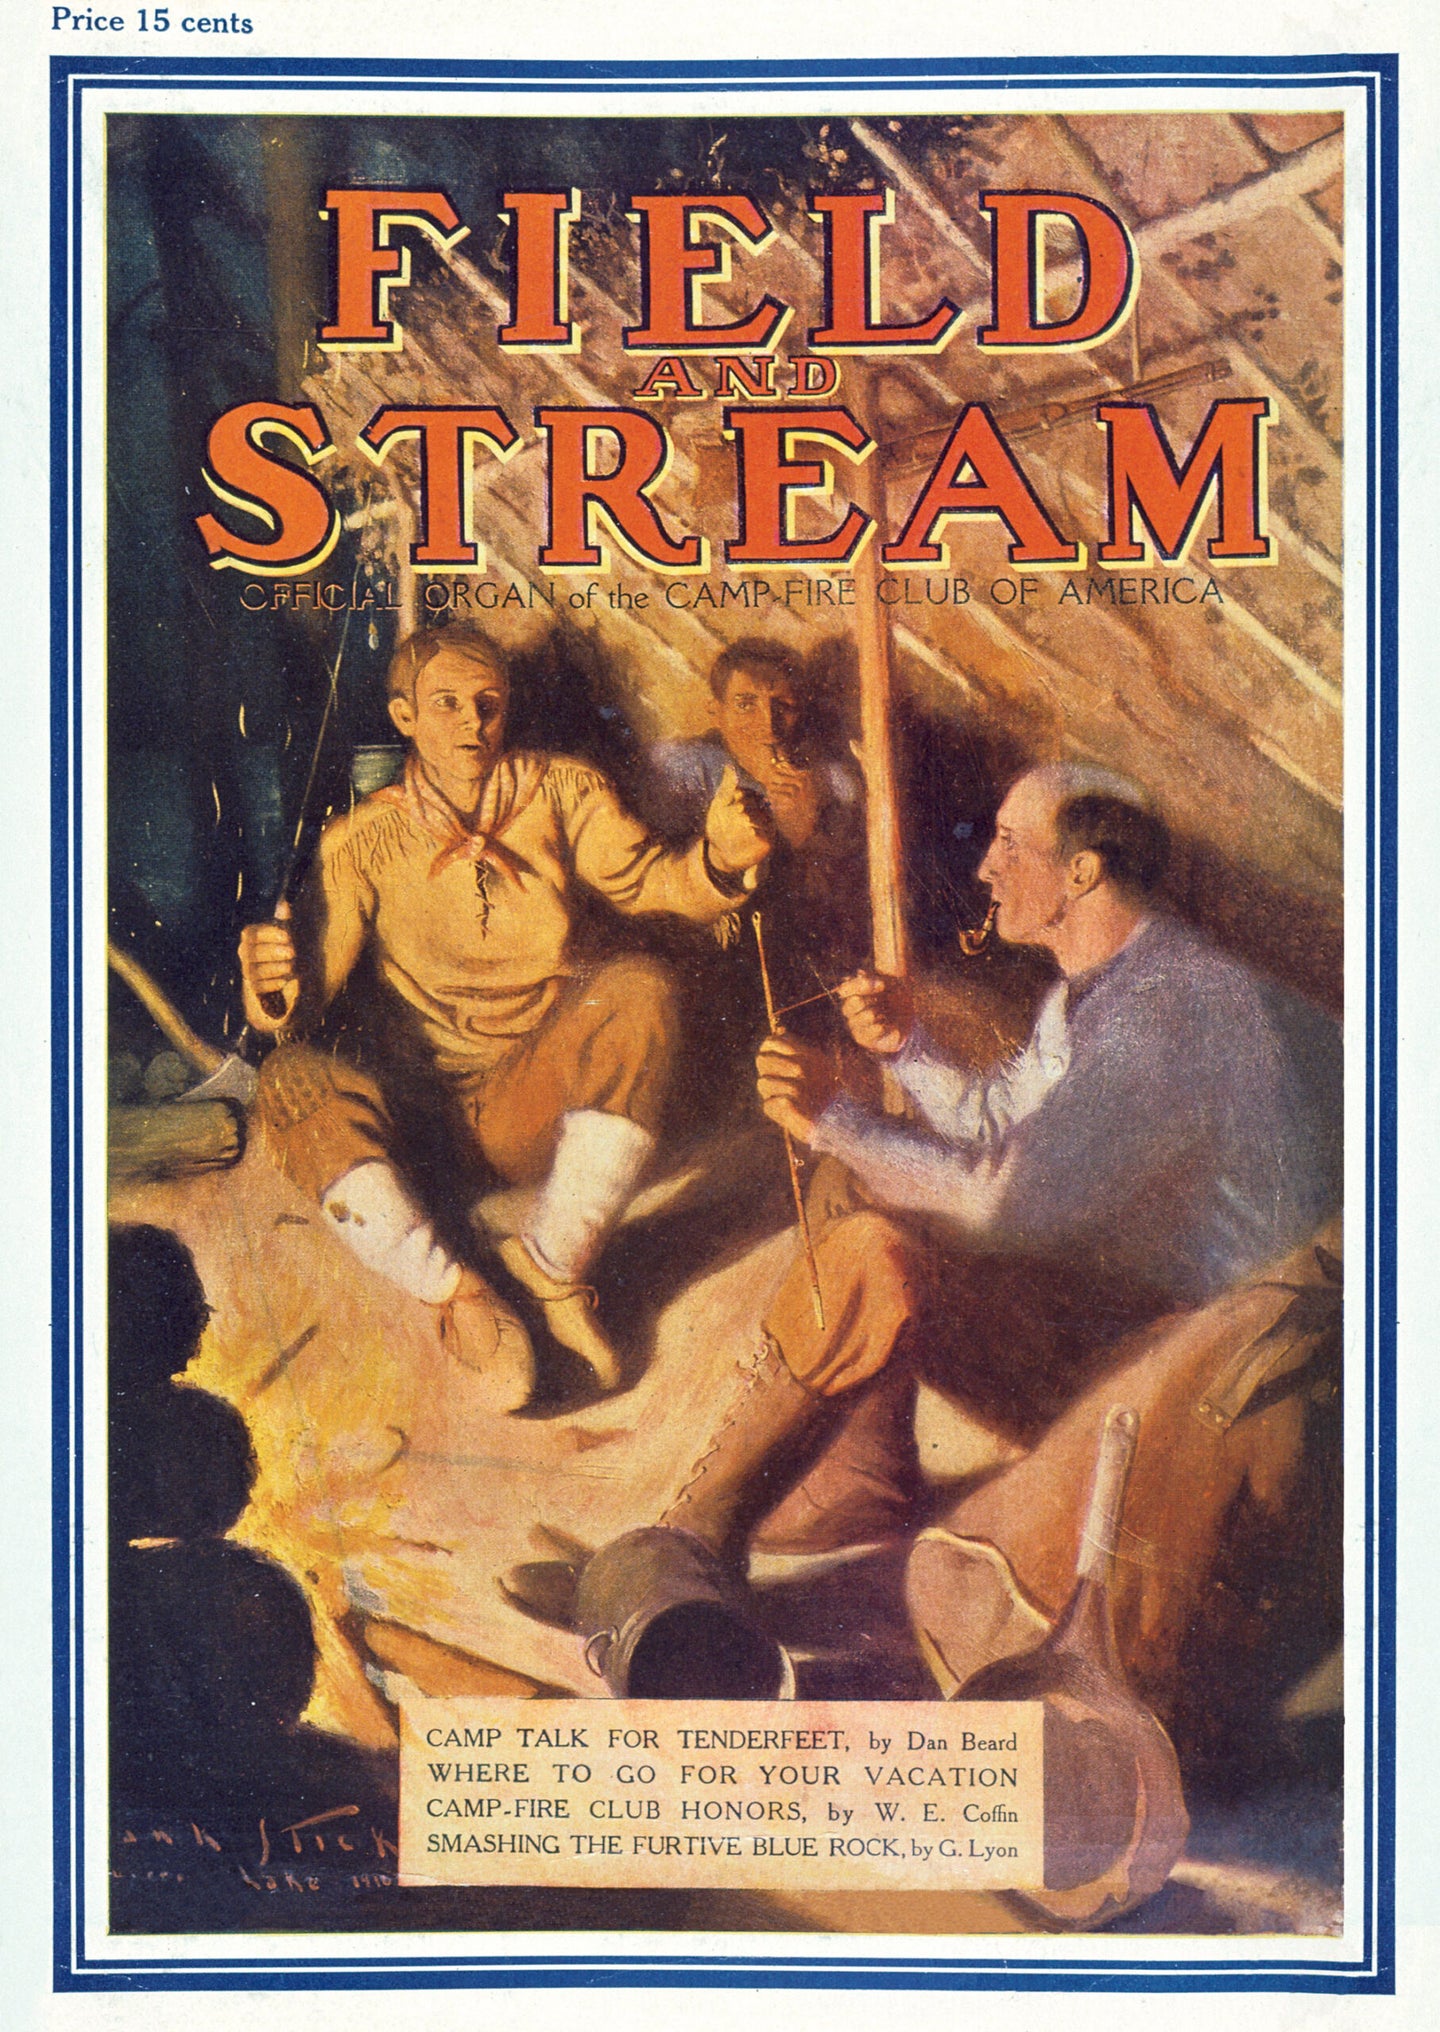 This year,_ Field & Stream_ is 115 years old, the oldest continually published sporting magazine in North America. And in that century-plus we've brought our readers some outstanding hunting and fishing stories -- breathtaking adventures, evocative and moving tales, and truly engaging fiction. To mark the occasion, we're picking one new story from our archives each week, for 20 weeks, and running it here. The stories are, in our view, some of the best that have appeared in our magazine. Check back each Monday for the latest in the series. After all 20 have been published, we'll give you the opportunity to vote for your favorite. We're anxious to find out if you like them as much as our readers did when they were first published.